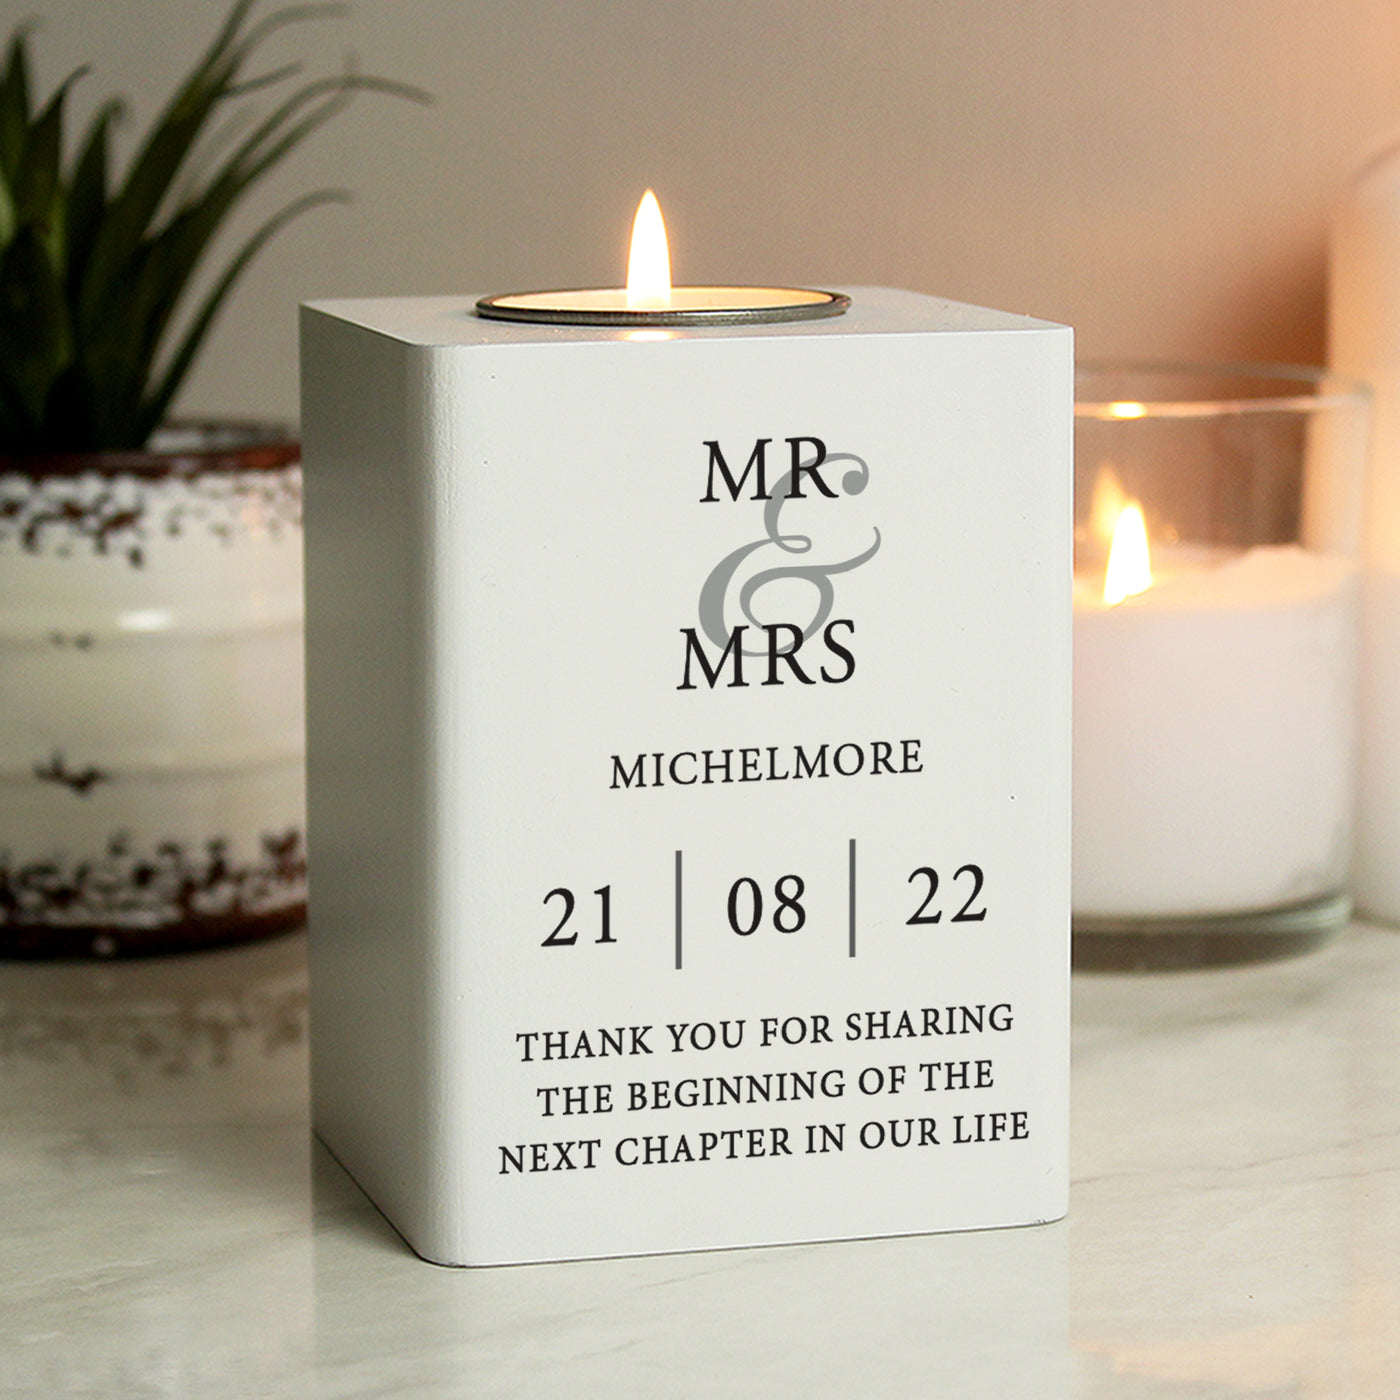 Personalised Couples White Wooden Tea light Candle Holder